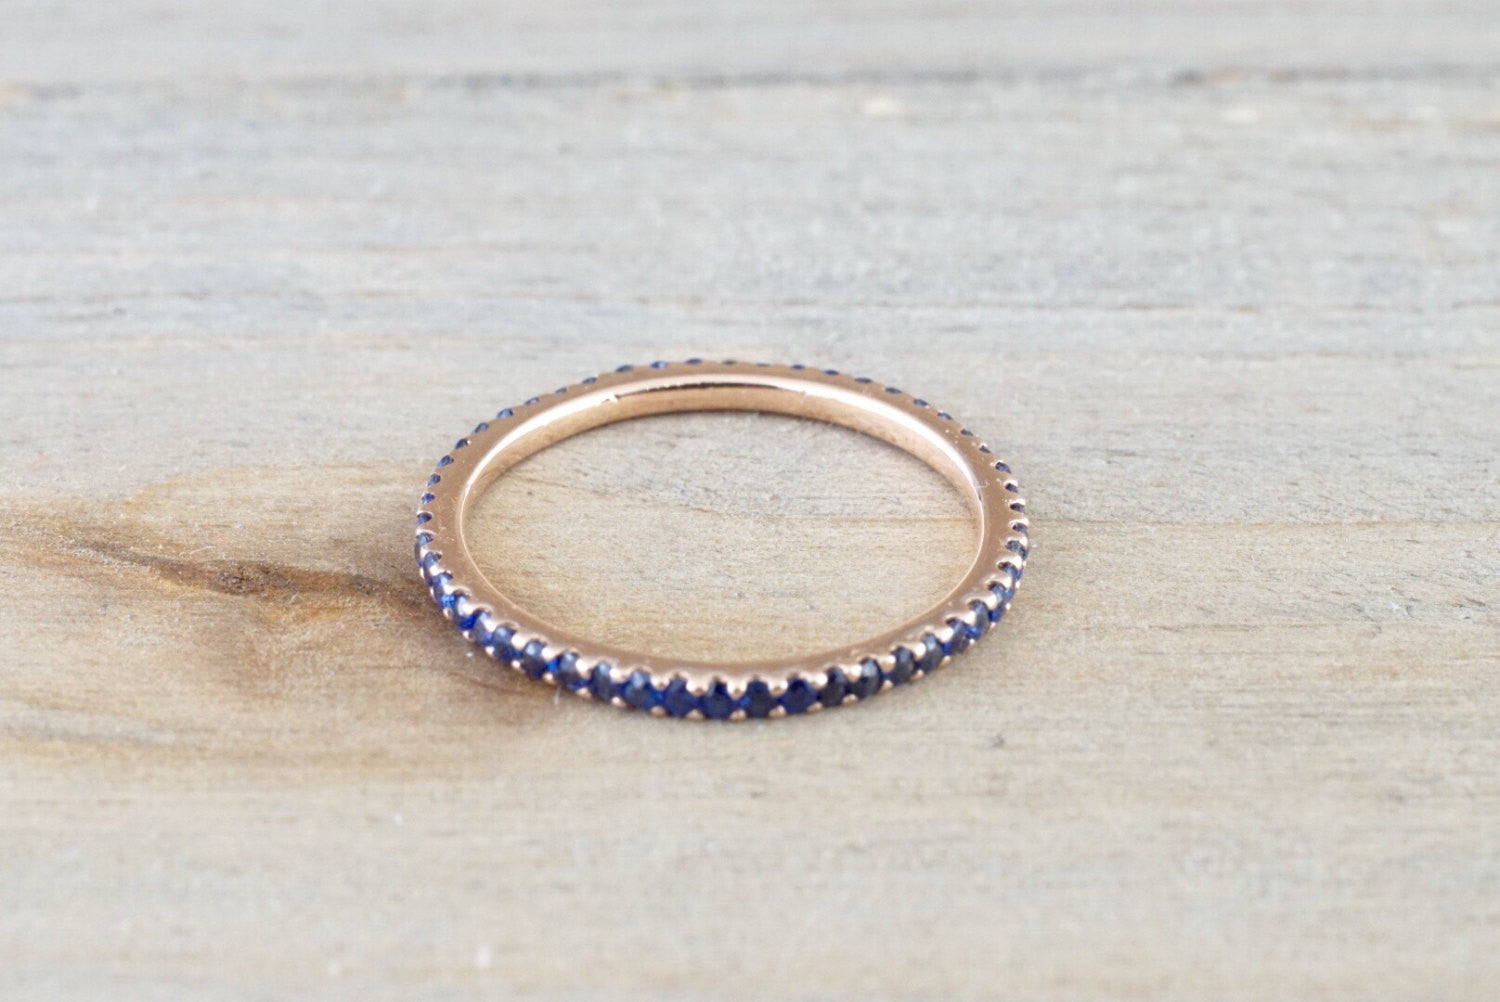 14k Rose Gold Blue Sapphire Dainty Thin Full Eternity Band Wedding Stackable Ring - Brilliant Facets